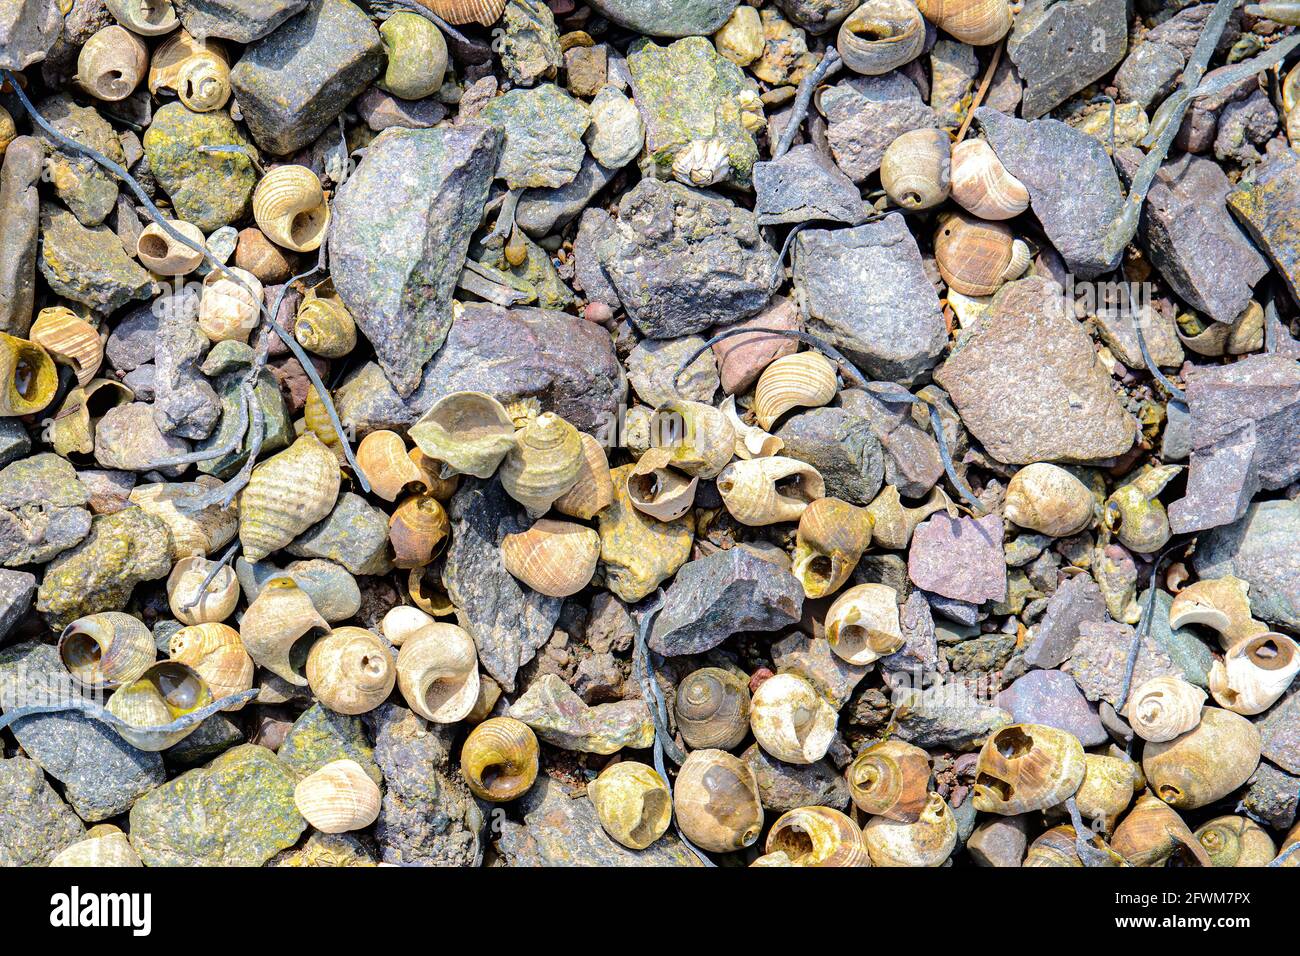 A large number of of periwinkles on a rocky beach. Some of the periwinkles have a small amount of algae. Sunny day. Closeup view. Stock Photo